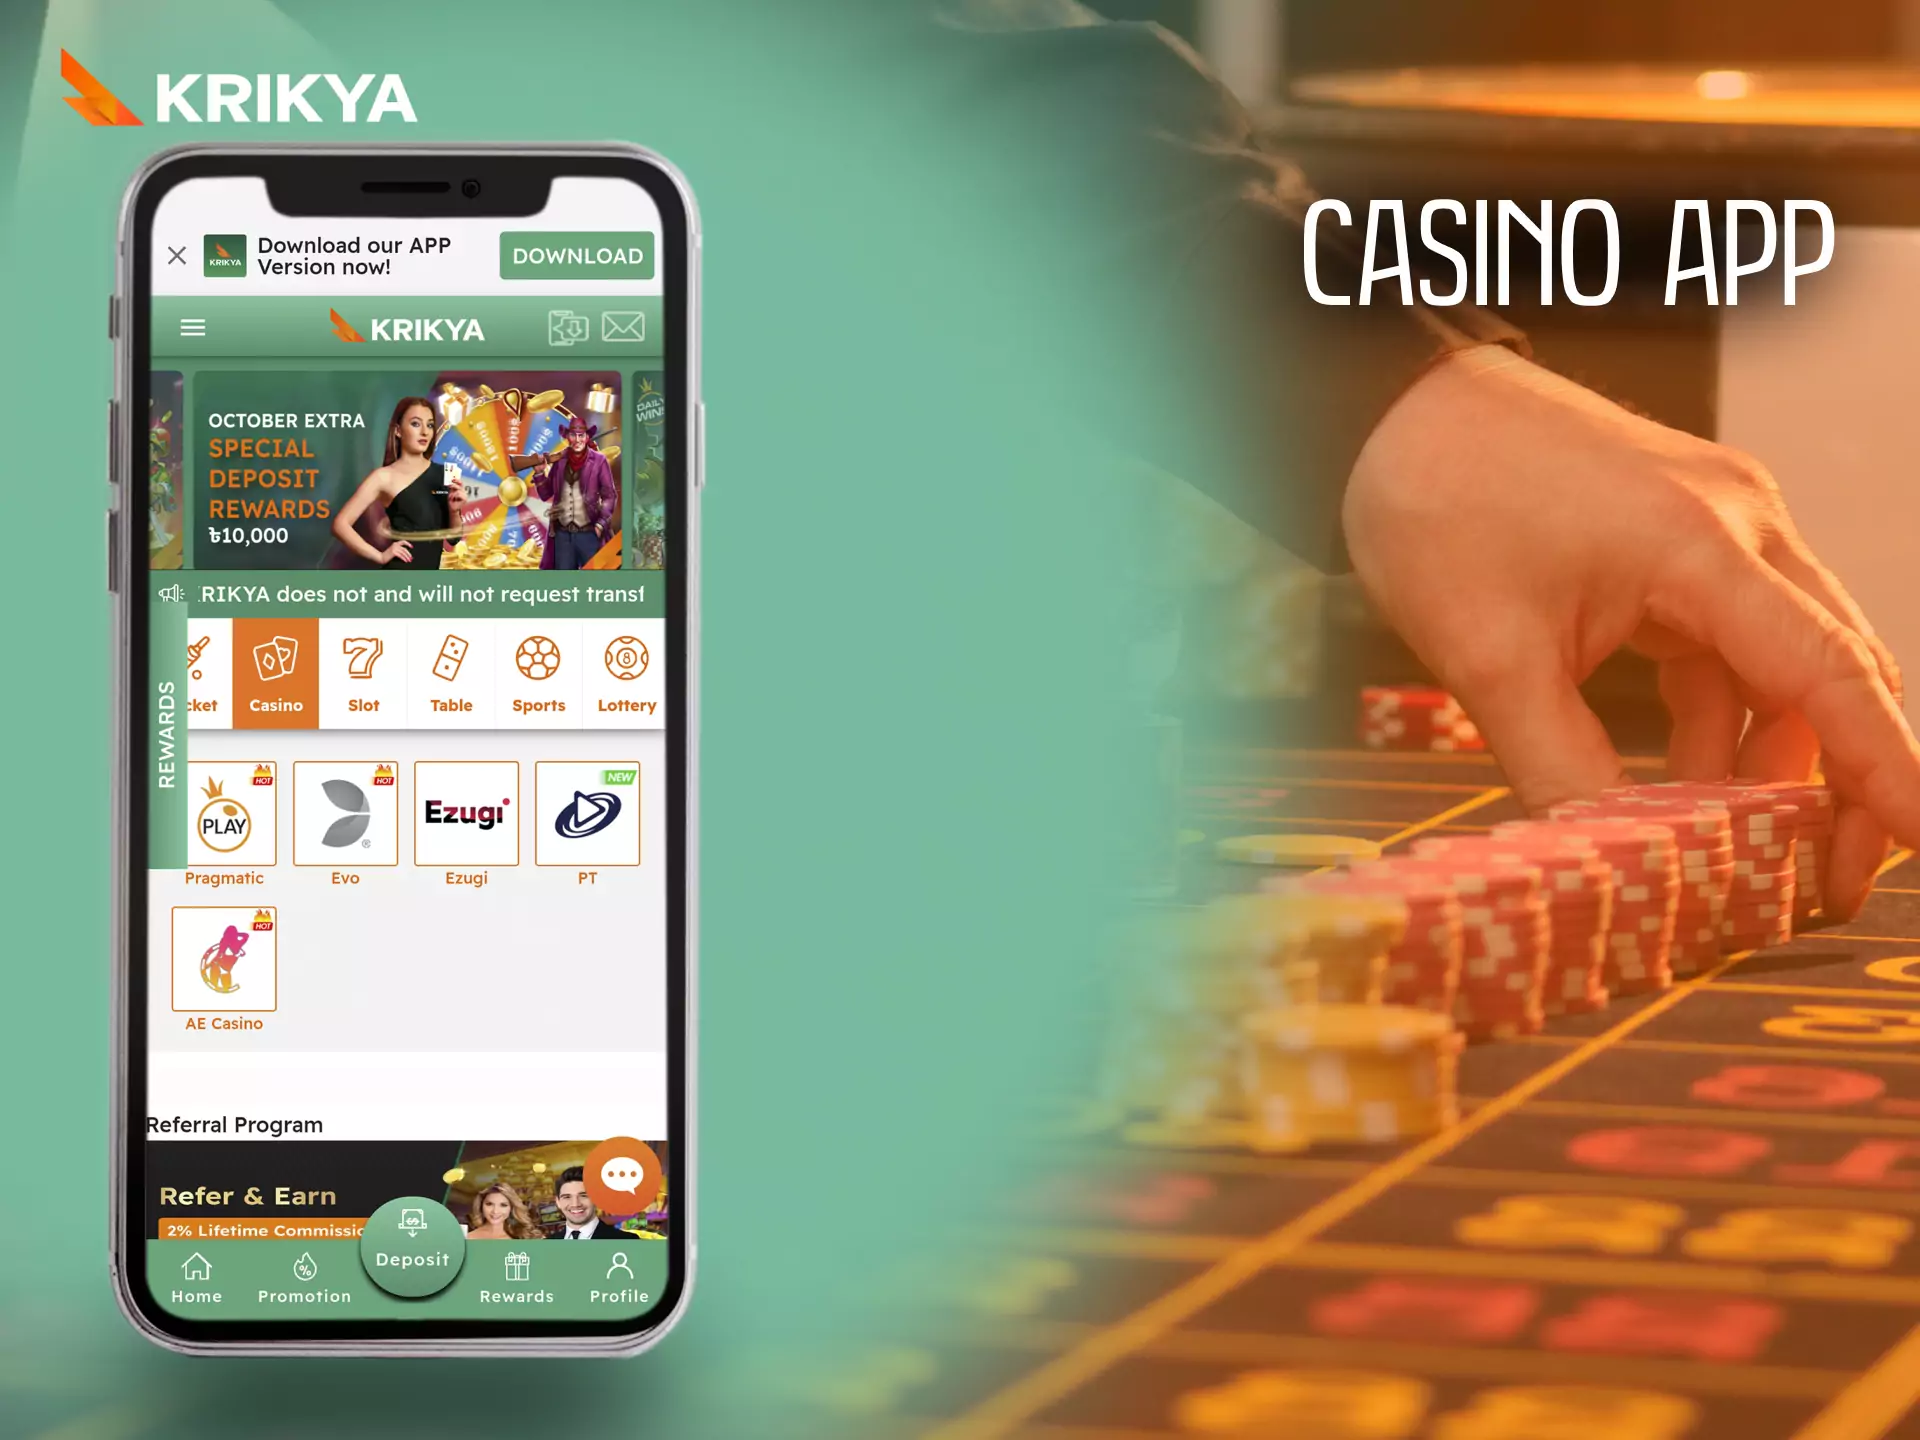 In the Krikya app, there is an opportunity to play at the casino.